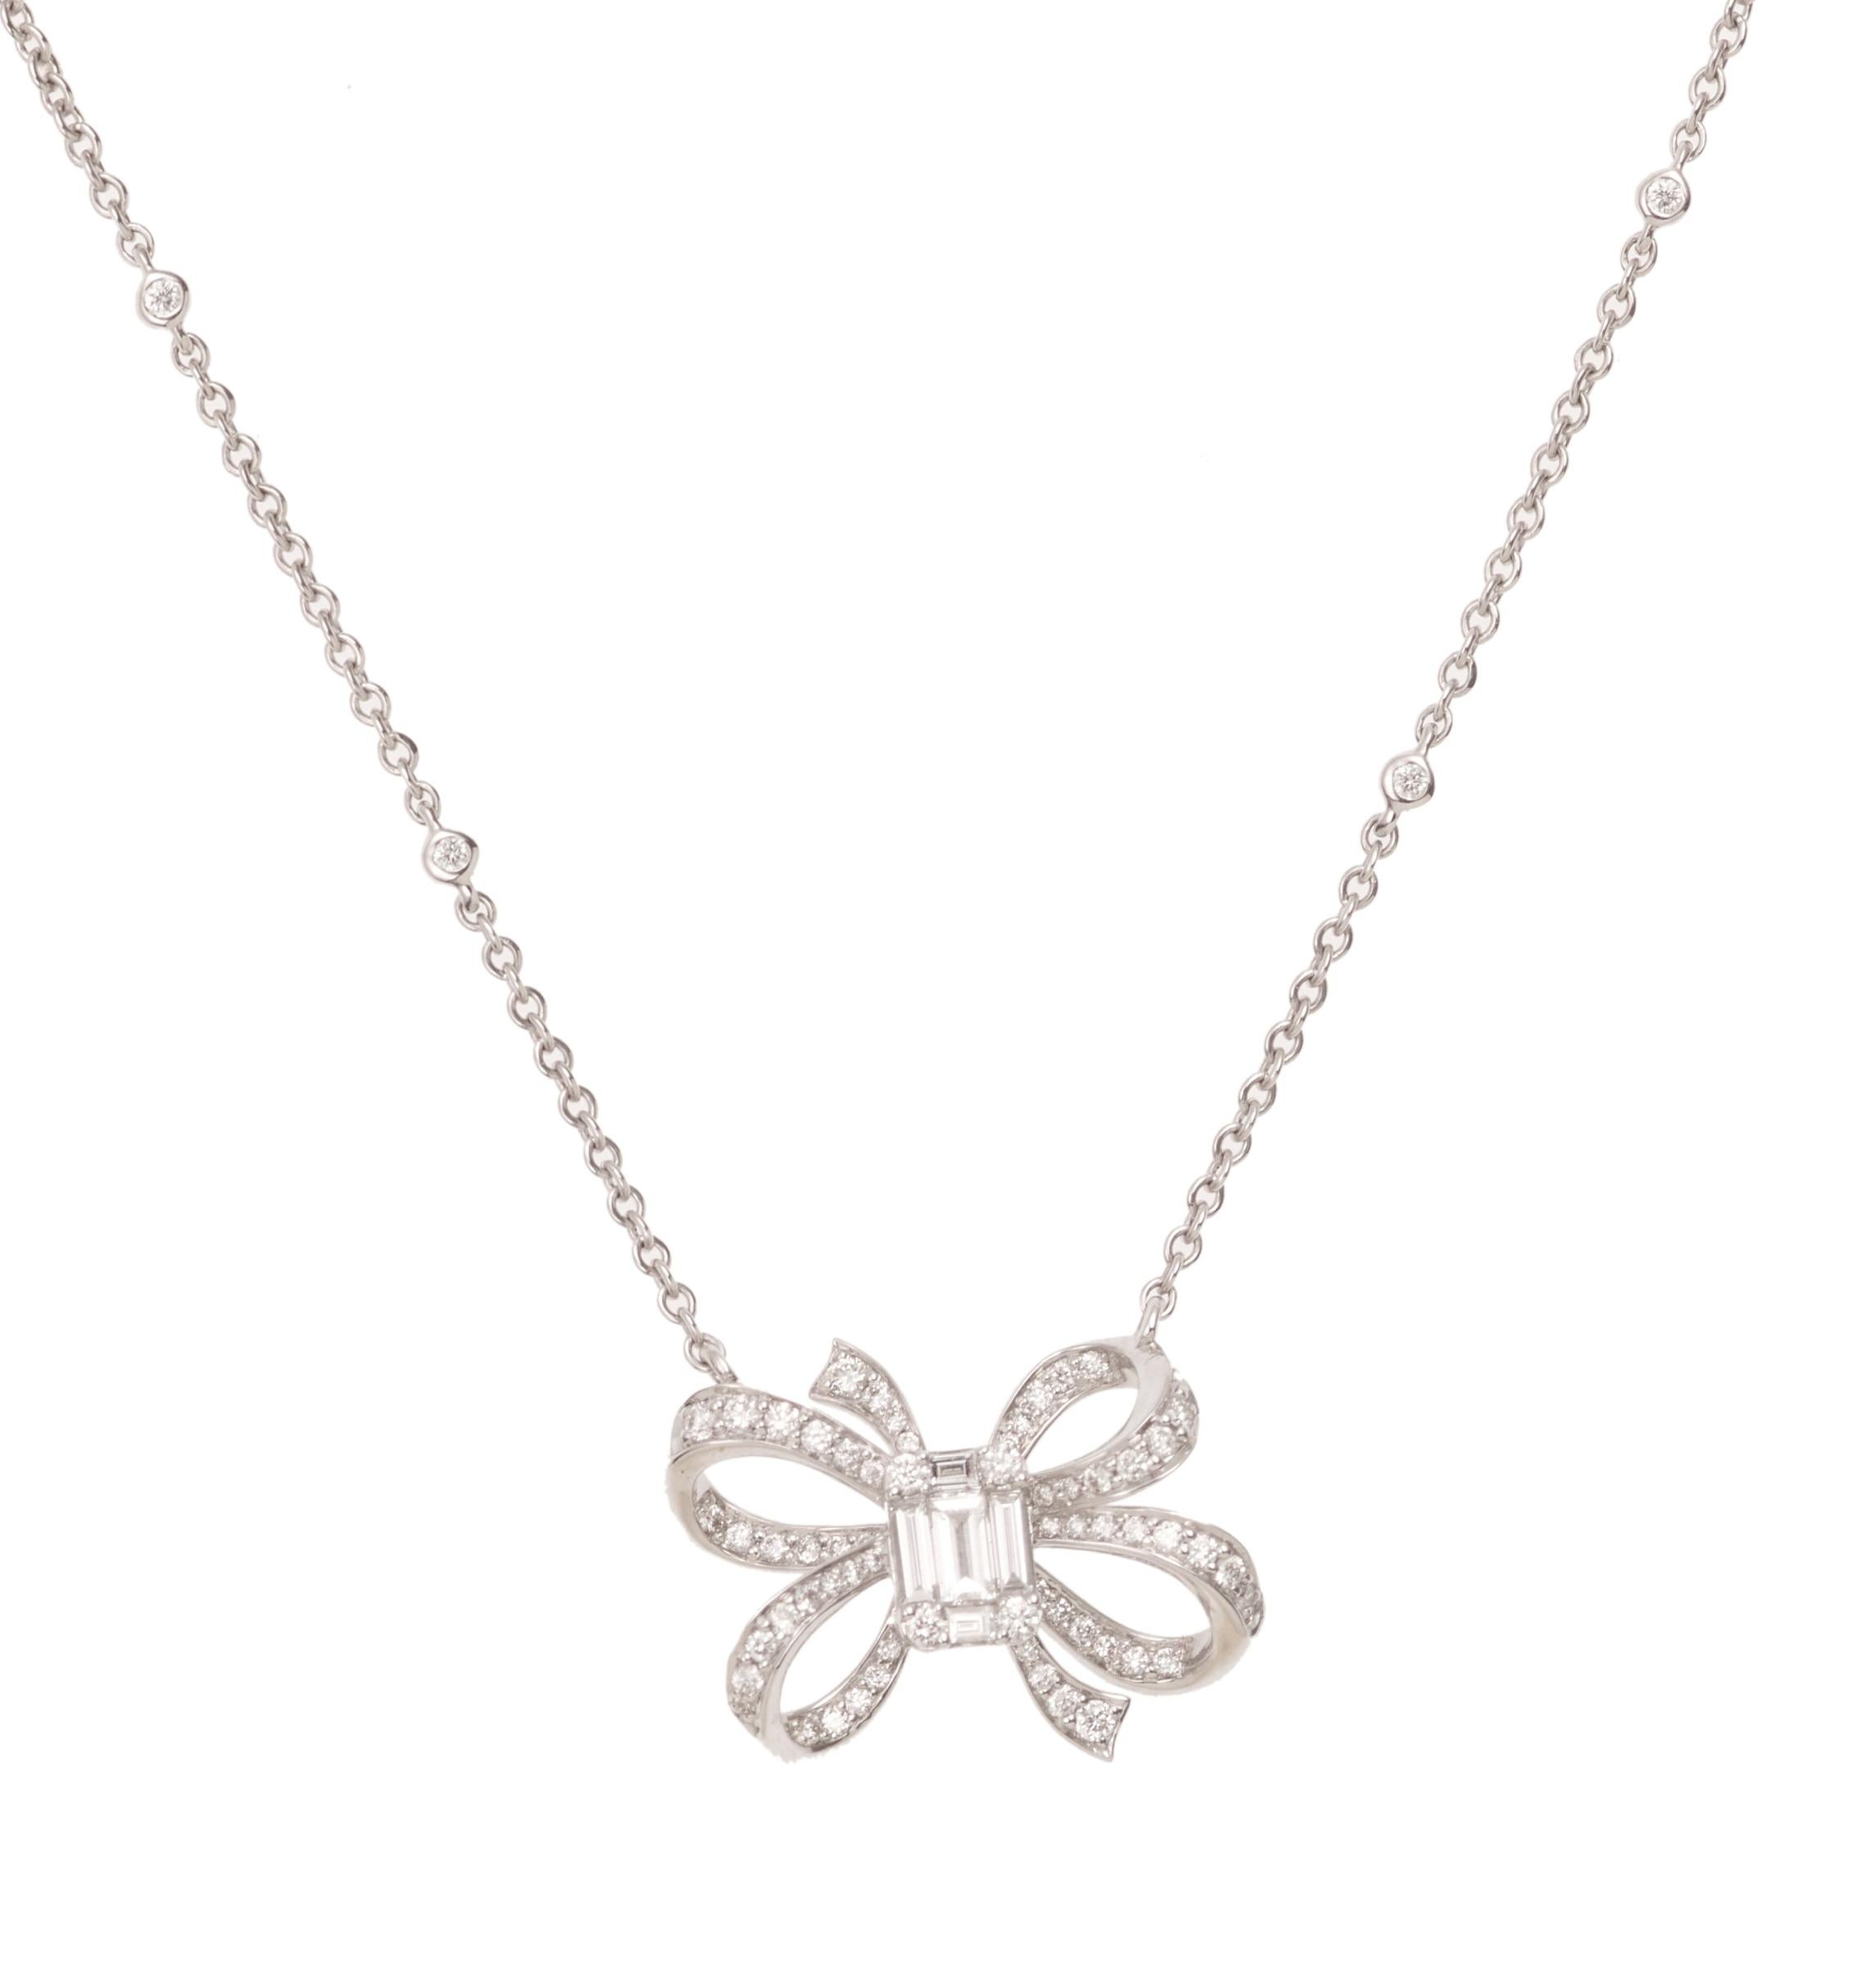 Lovely necklace representing a white gold ribbon bow set with a diamond pavement.

The central pavement shows an emerald cut effect. 4 little closed-set diamonds adorn the chain.

Dimensions : 2.09 x 1.49 cm (0.824 x 0.586 inches)

Total diamond